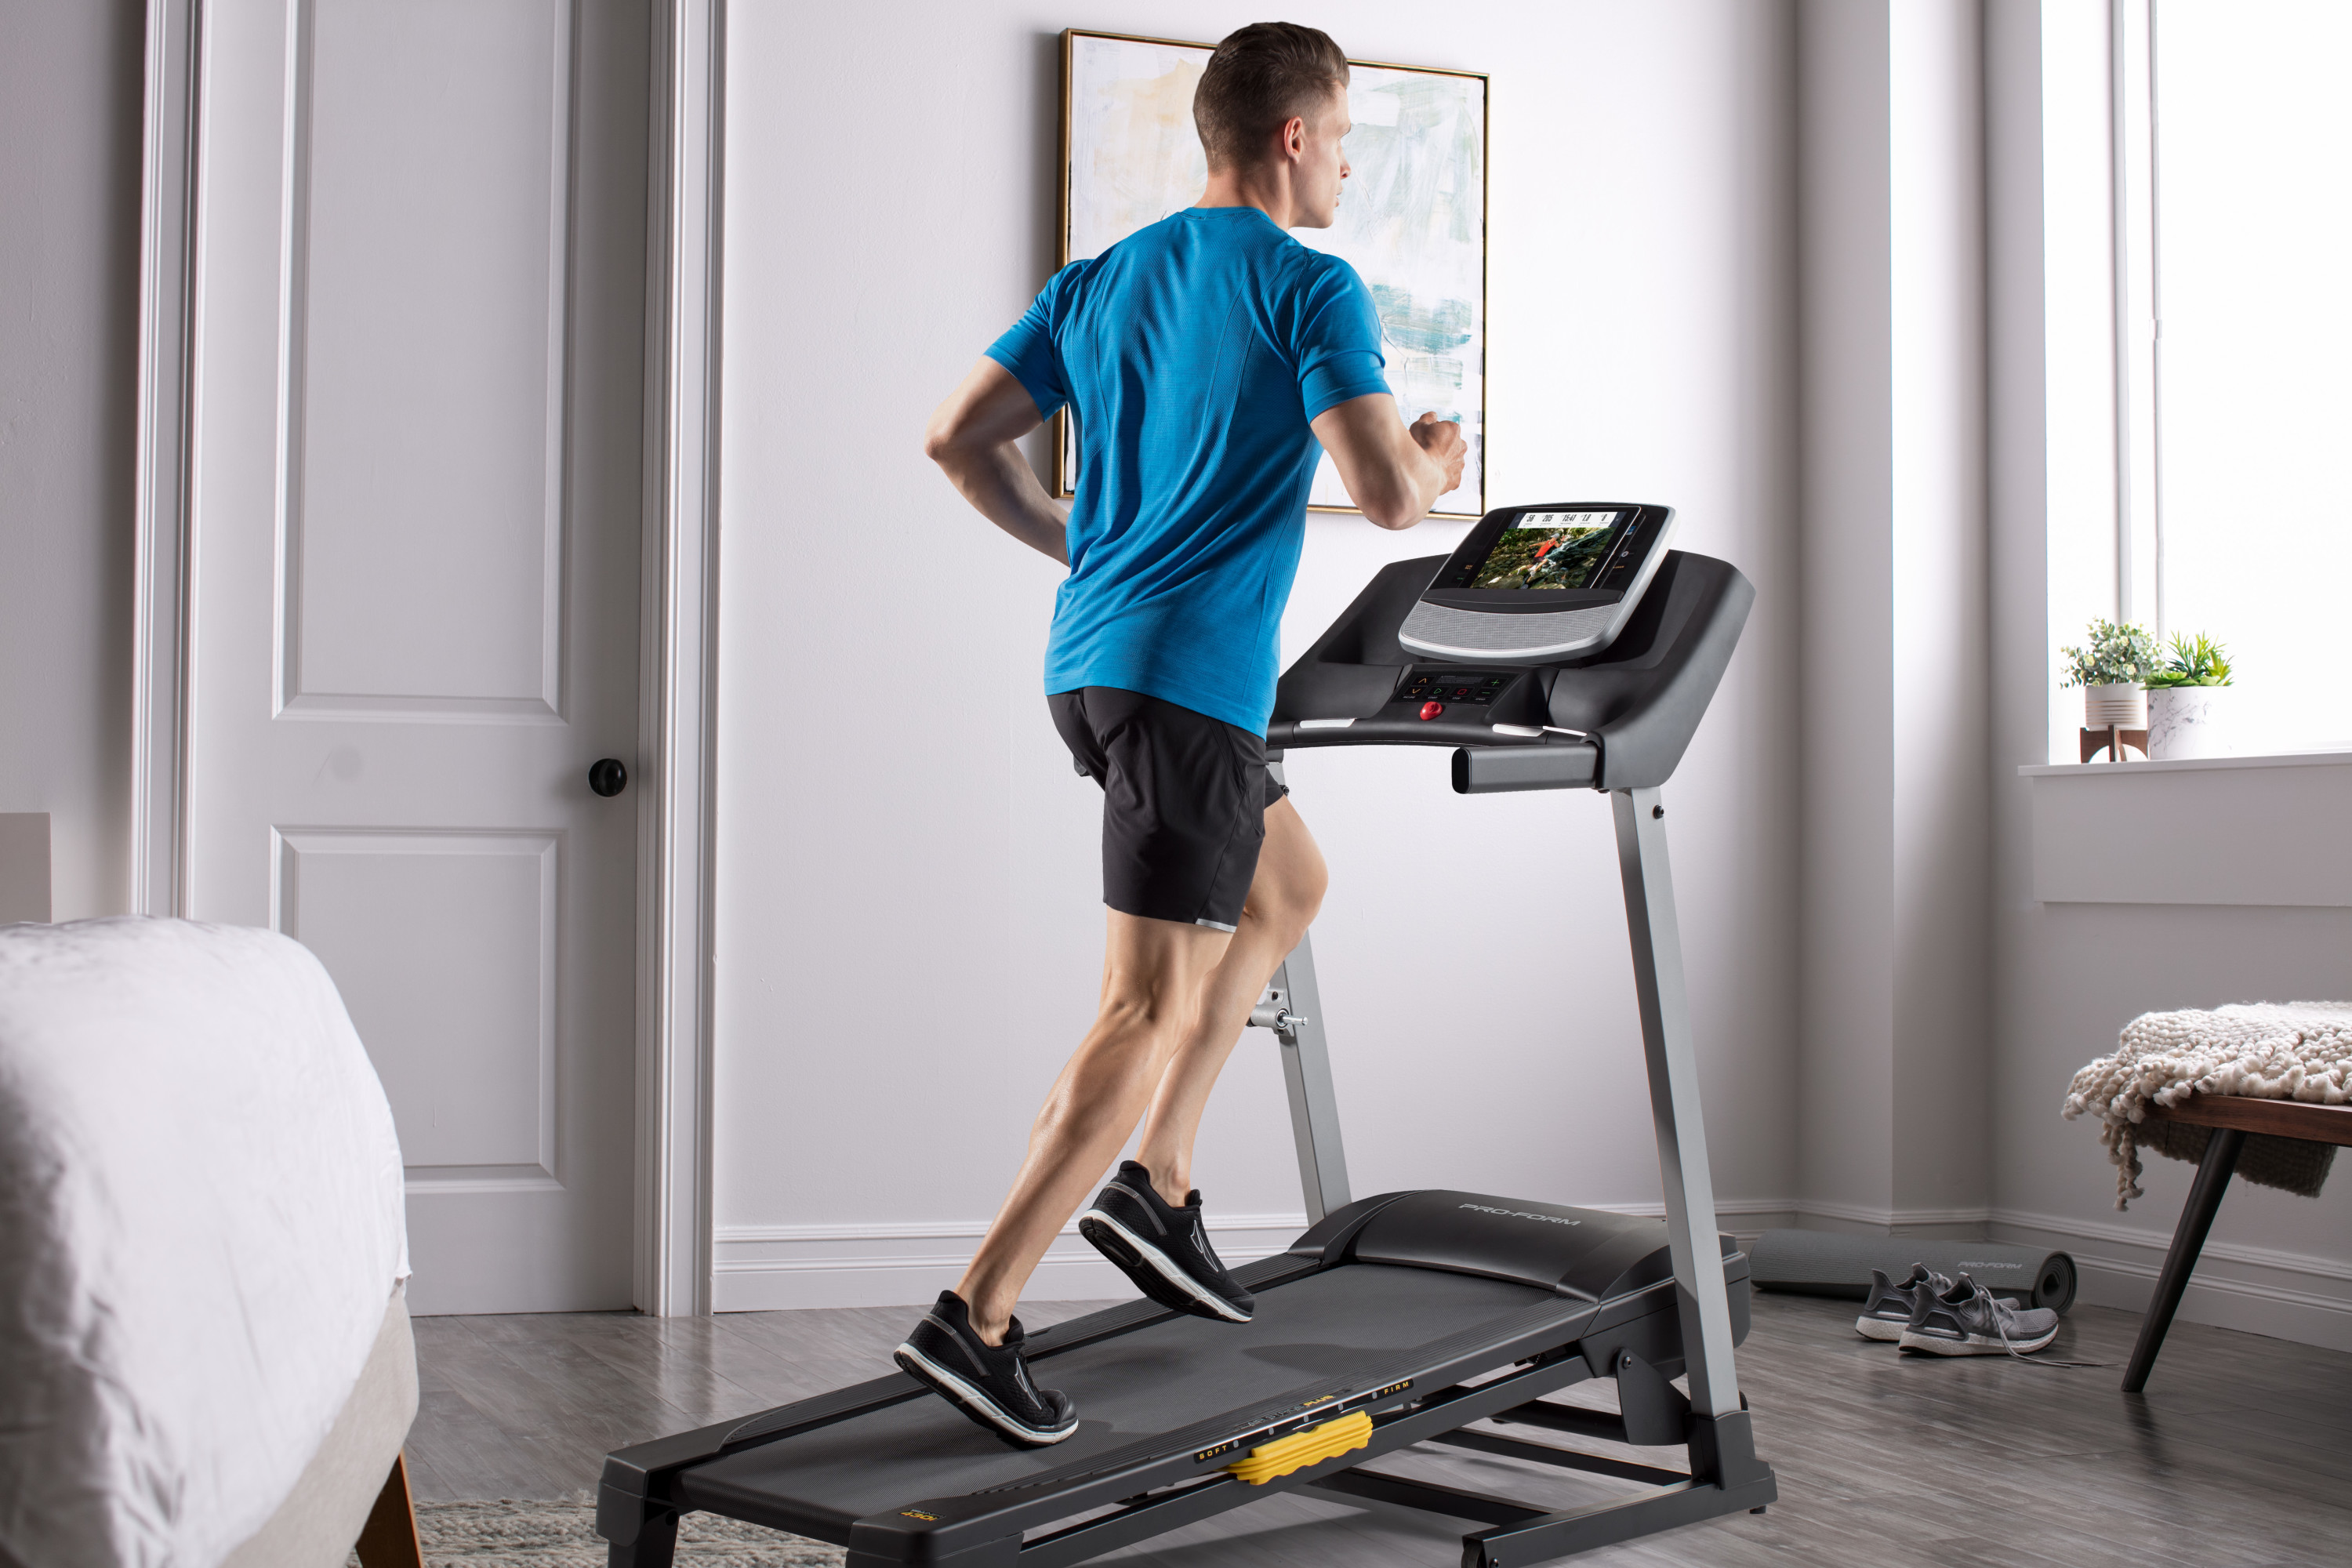 ProForm Trainer 430i Folding Smart Treadmill with 10% Incline, iFit Bluetooth Enabled - image 18 of 18